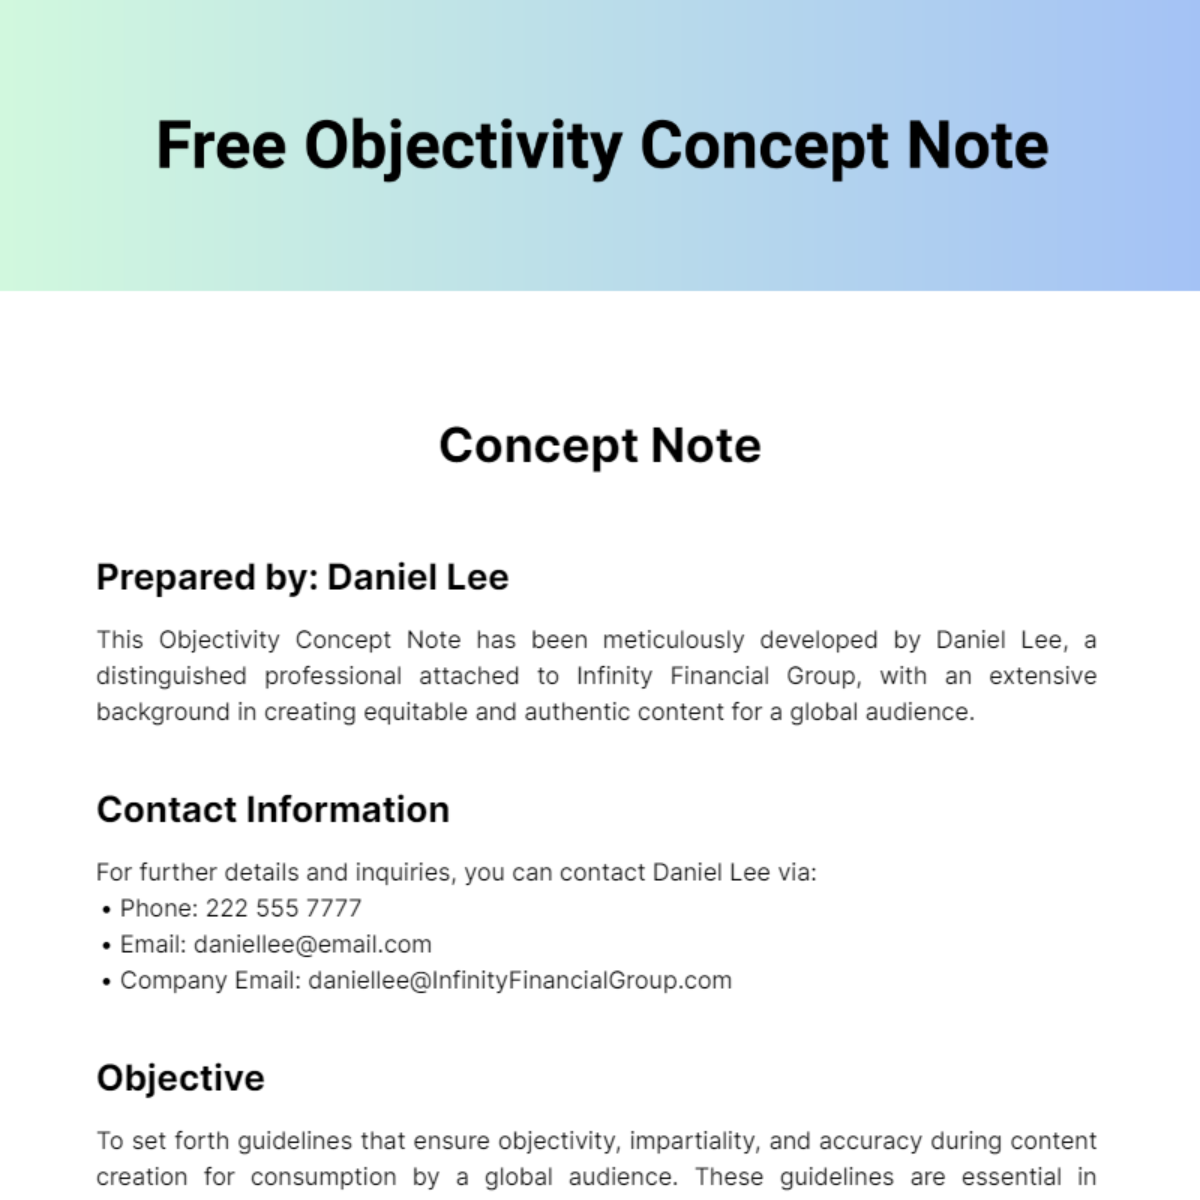 Free Objectivity Concept Note Template